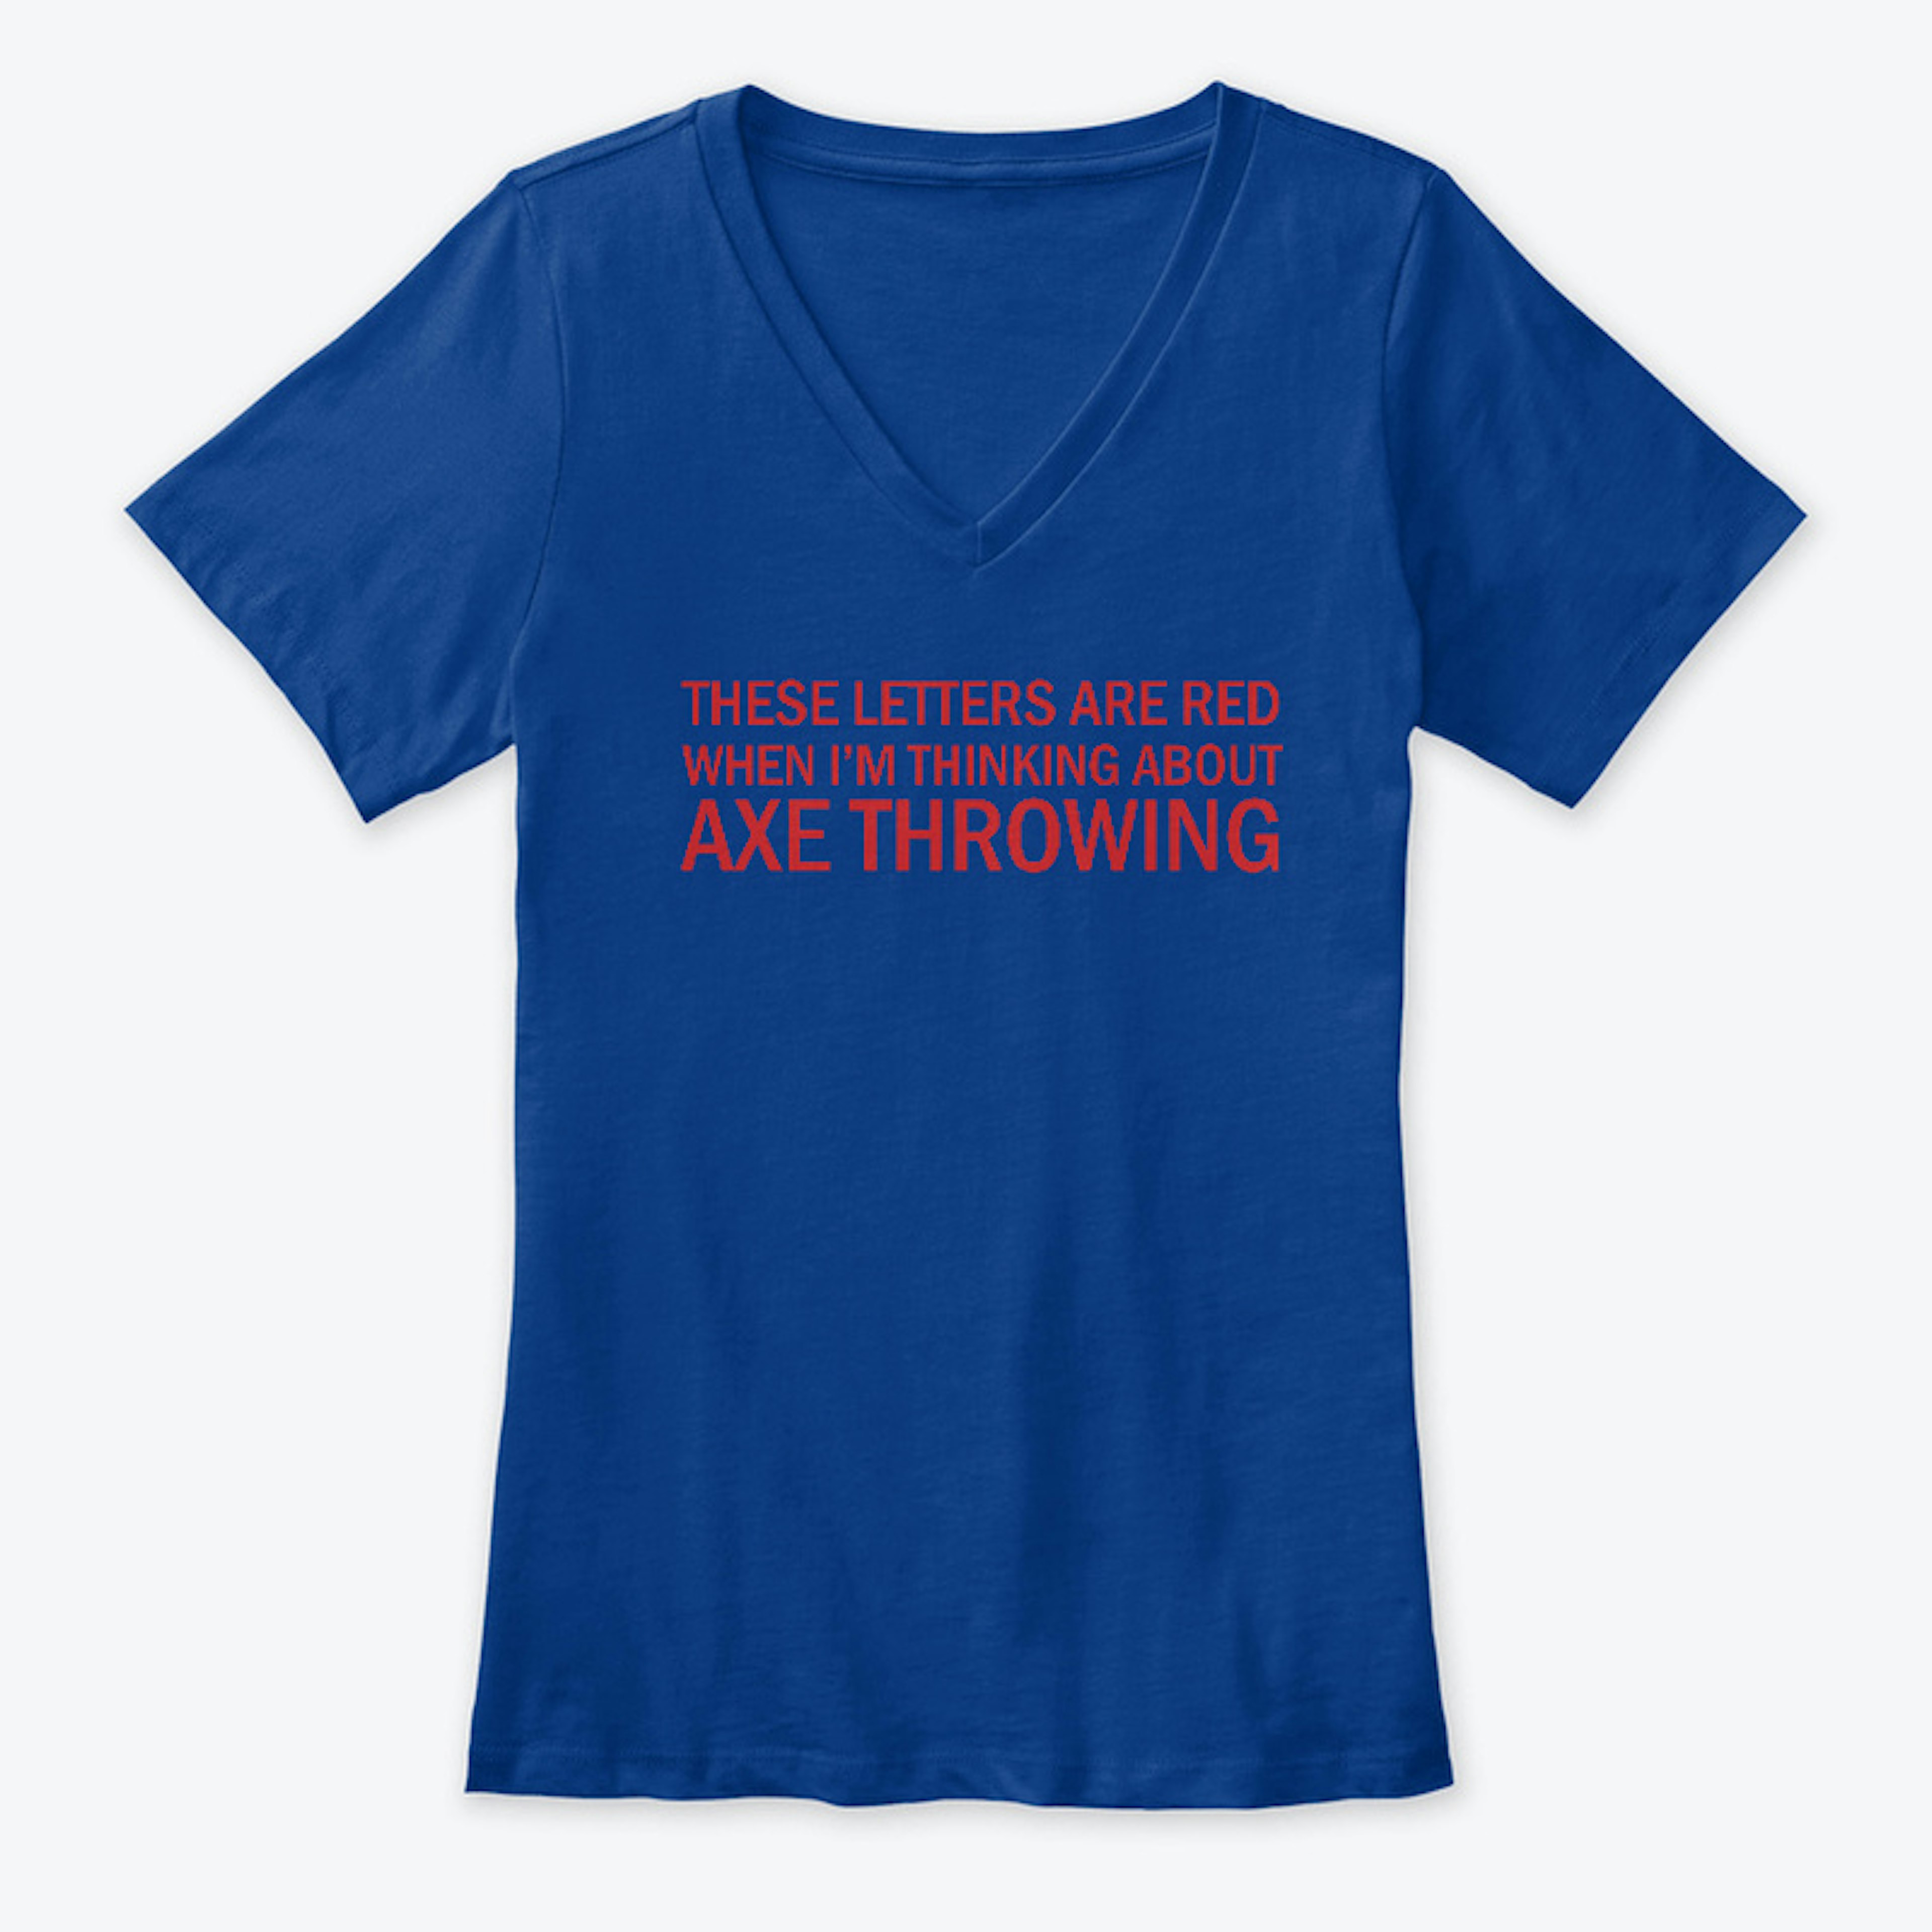 Thinking about axe throwing